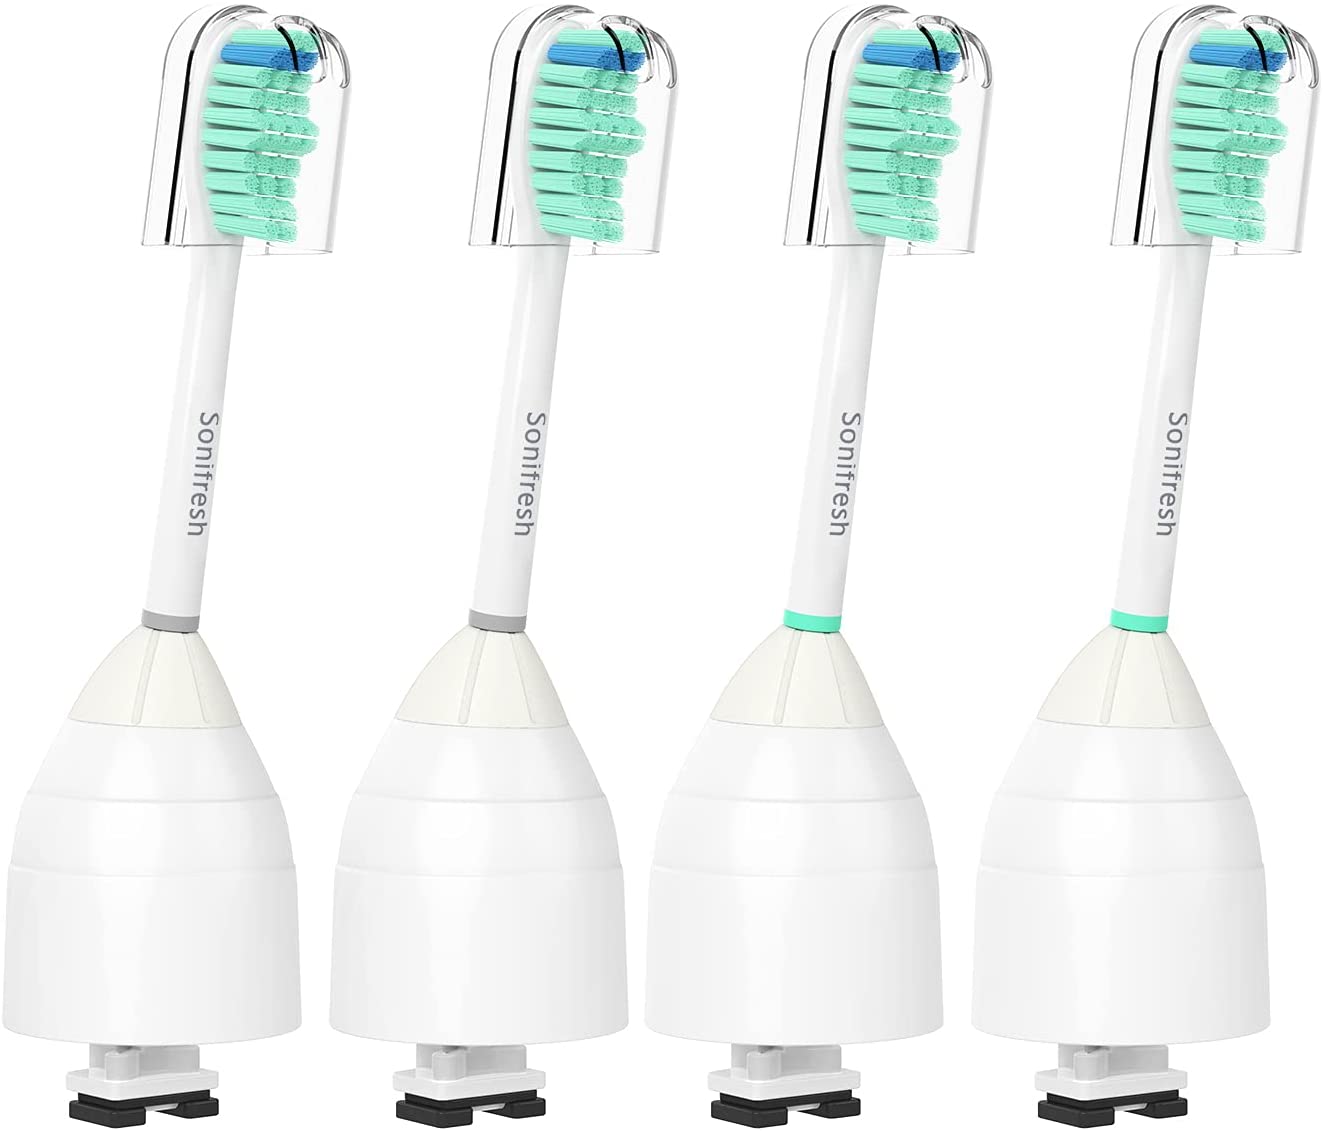 4 Pack E-Series Senyum Replacement Brush Heads - Upgraded Quality and Compatible with All Philips Sonicare Screw-on Electric Toothbrushes - FBA Shipping $8.83